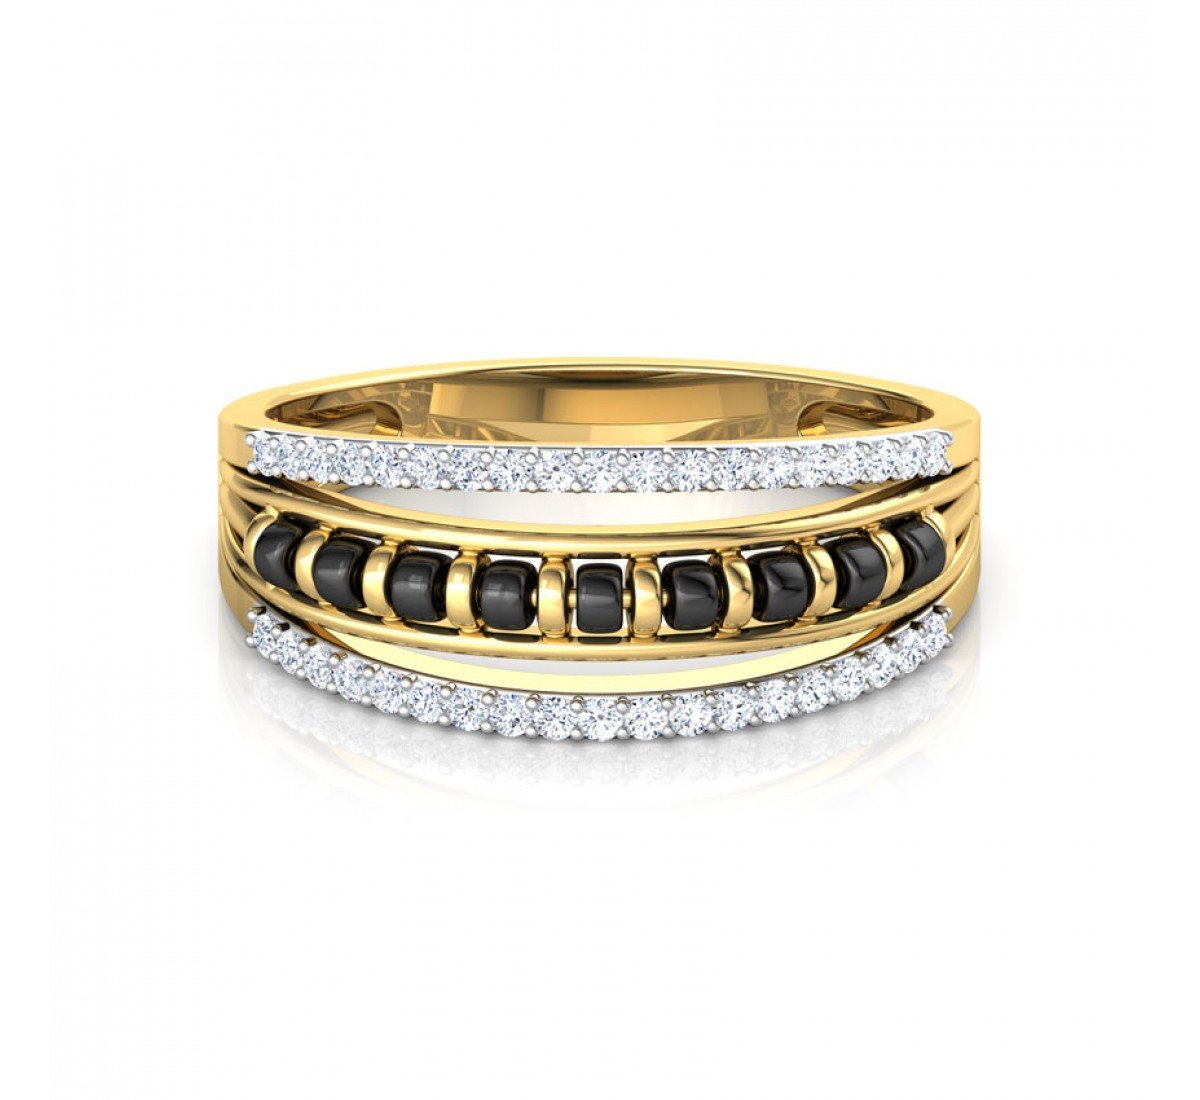 Latest Designs & Collections of Finger Rings | Senco Gold